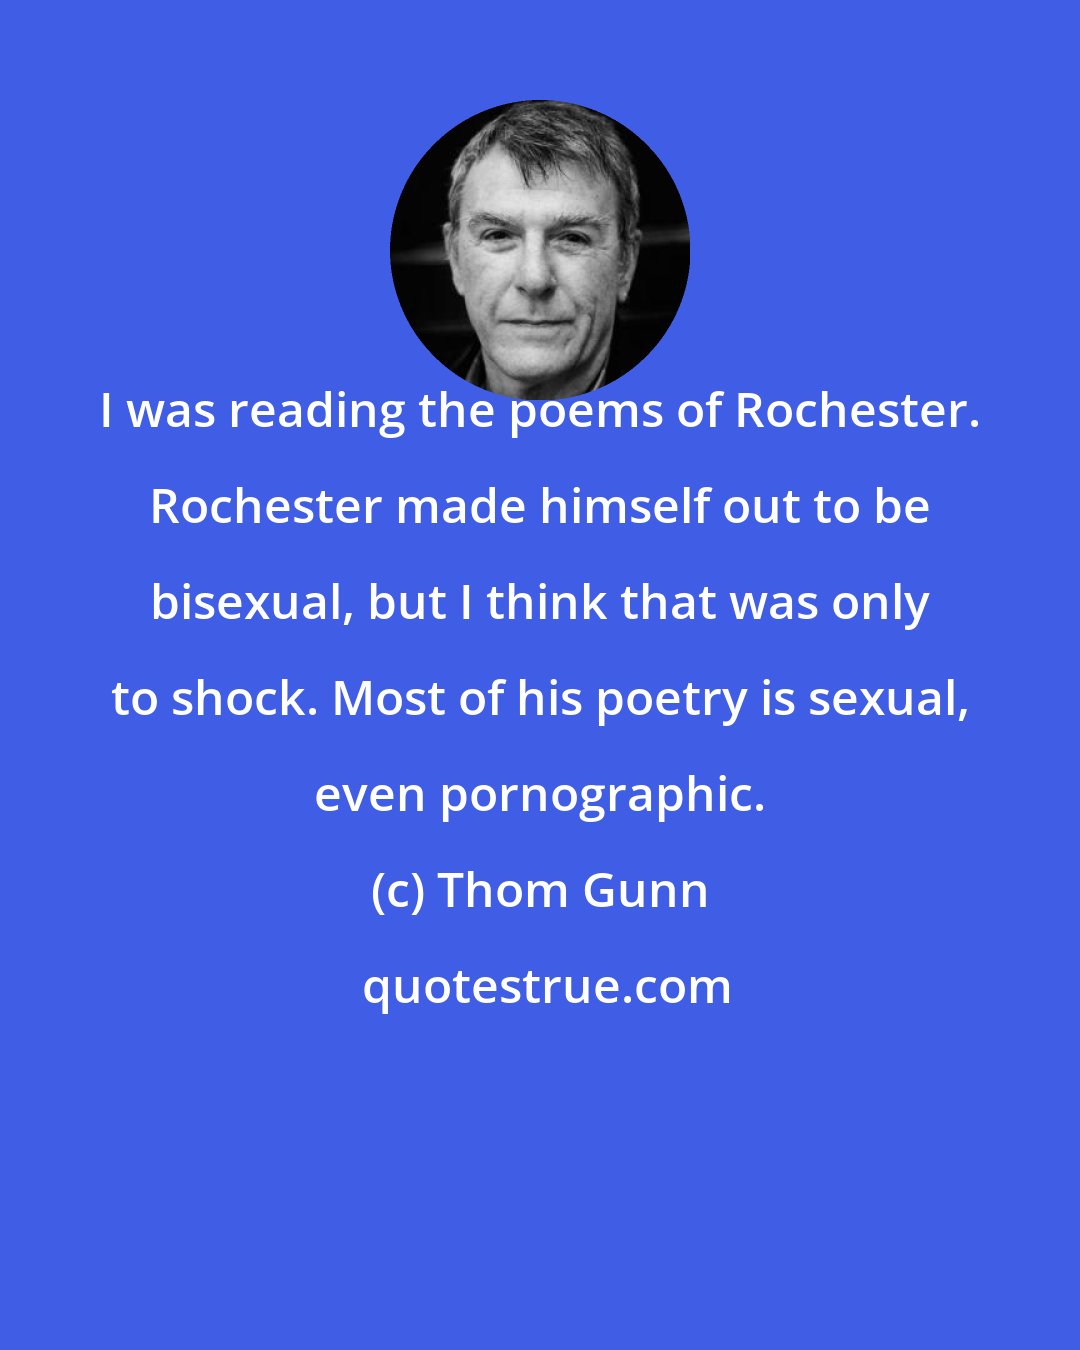 Thom Gunn: I was reading the poems of Rochester. Rochester made himself out to be bisexual, but I think that was only to shock. Most of his poetry is sexual, even pornographic.